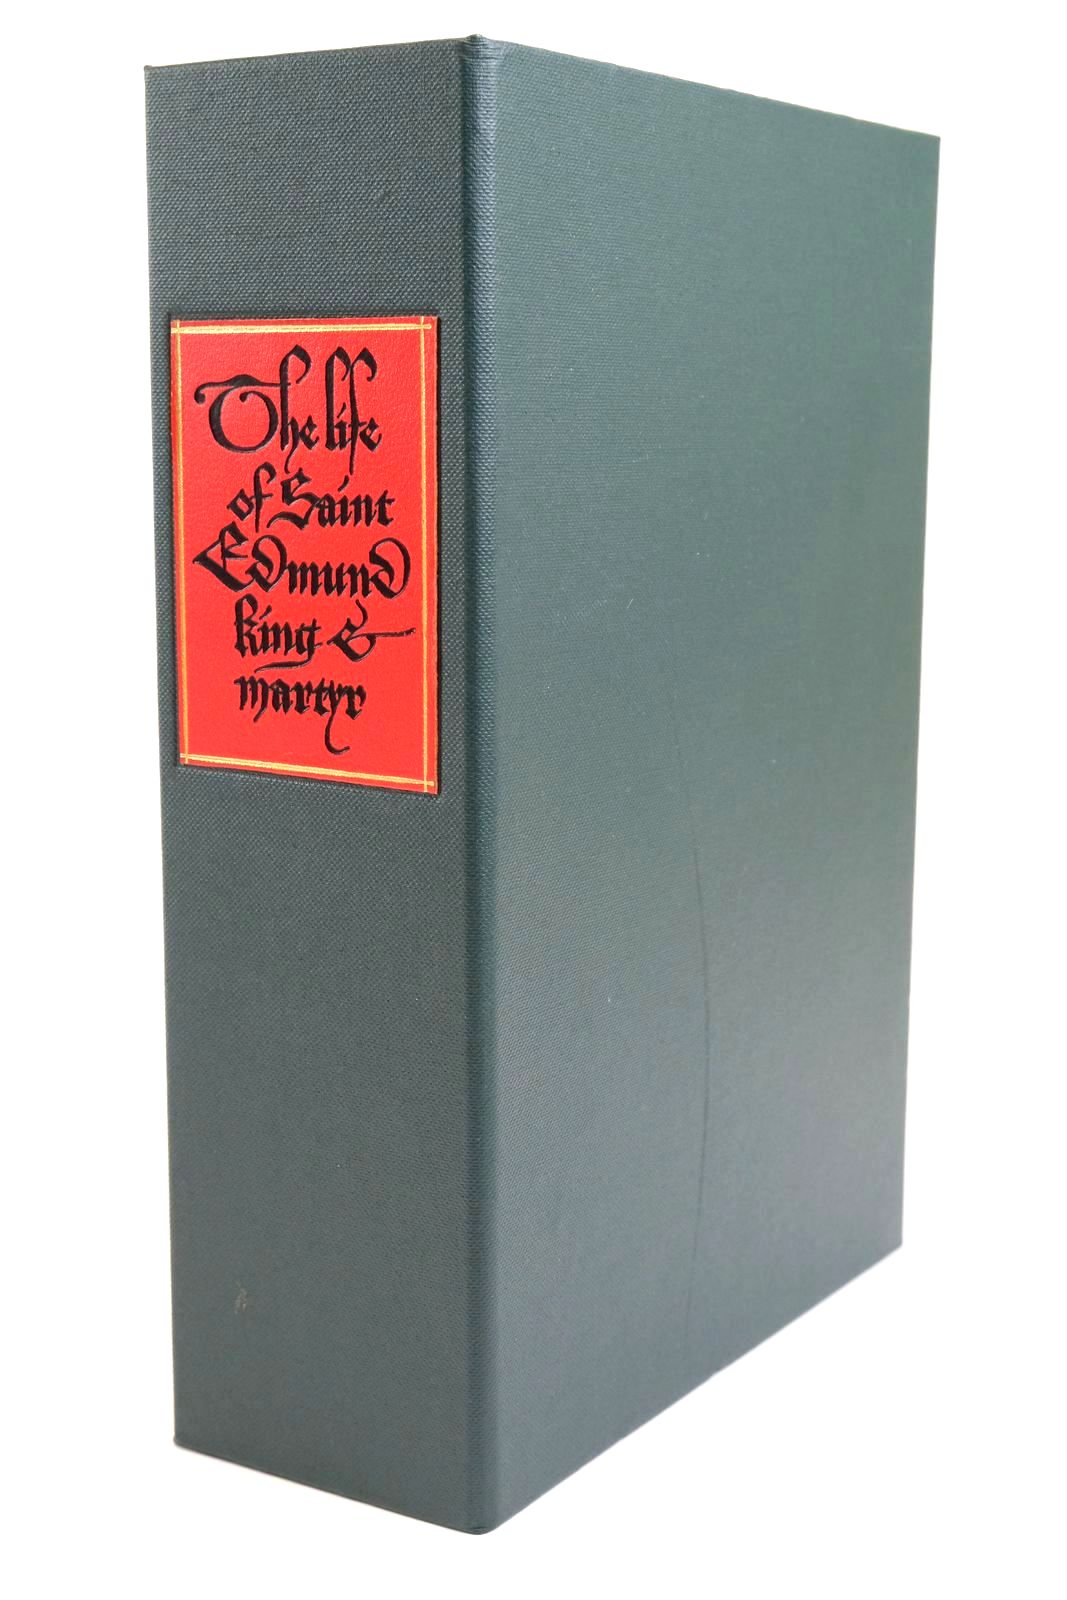 Photo of THE LIFE OF SAINT EDMUND KING & MARTYR written by Lydgate, John
Edwards, A.S.G. published by Folio Society (STOCK CODE: 1321648)  for sale by Stella & Rose's Books